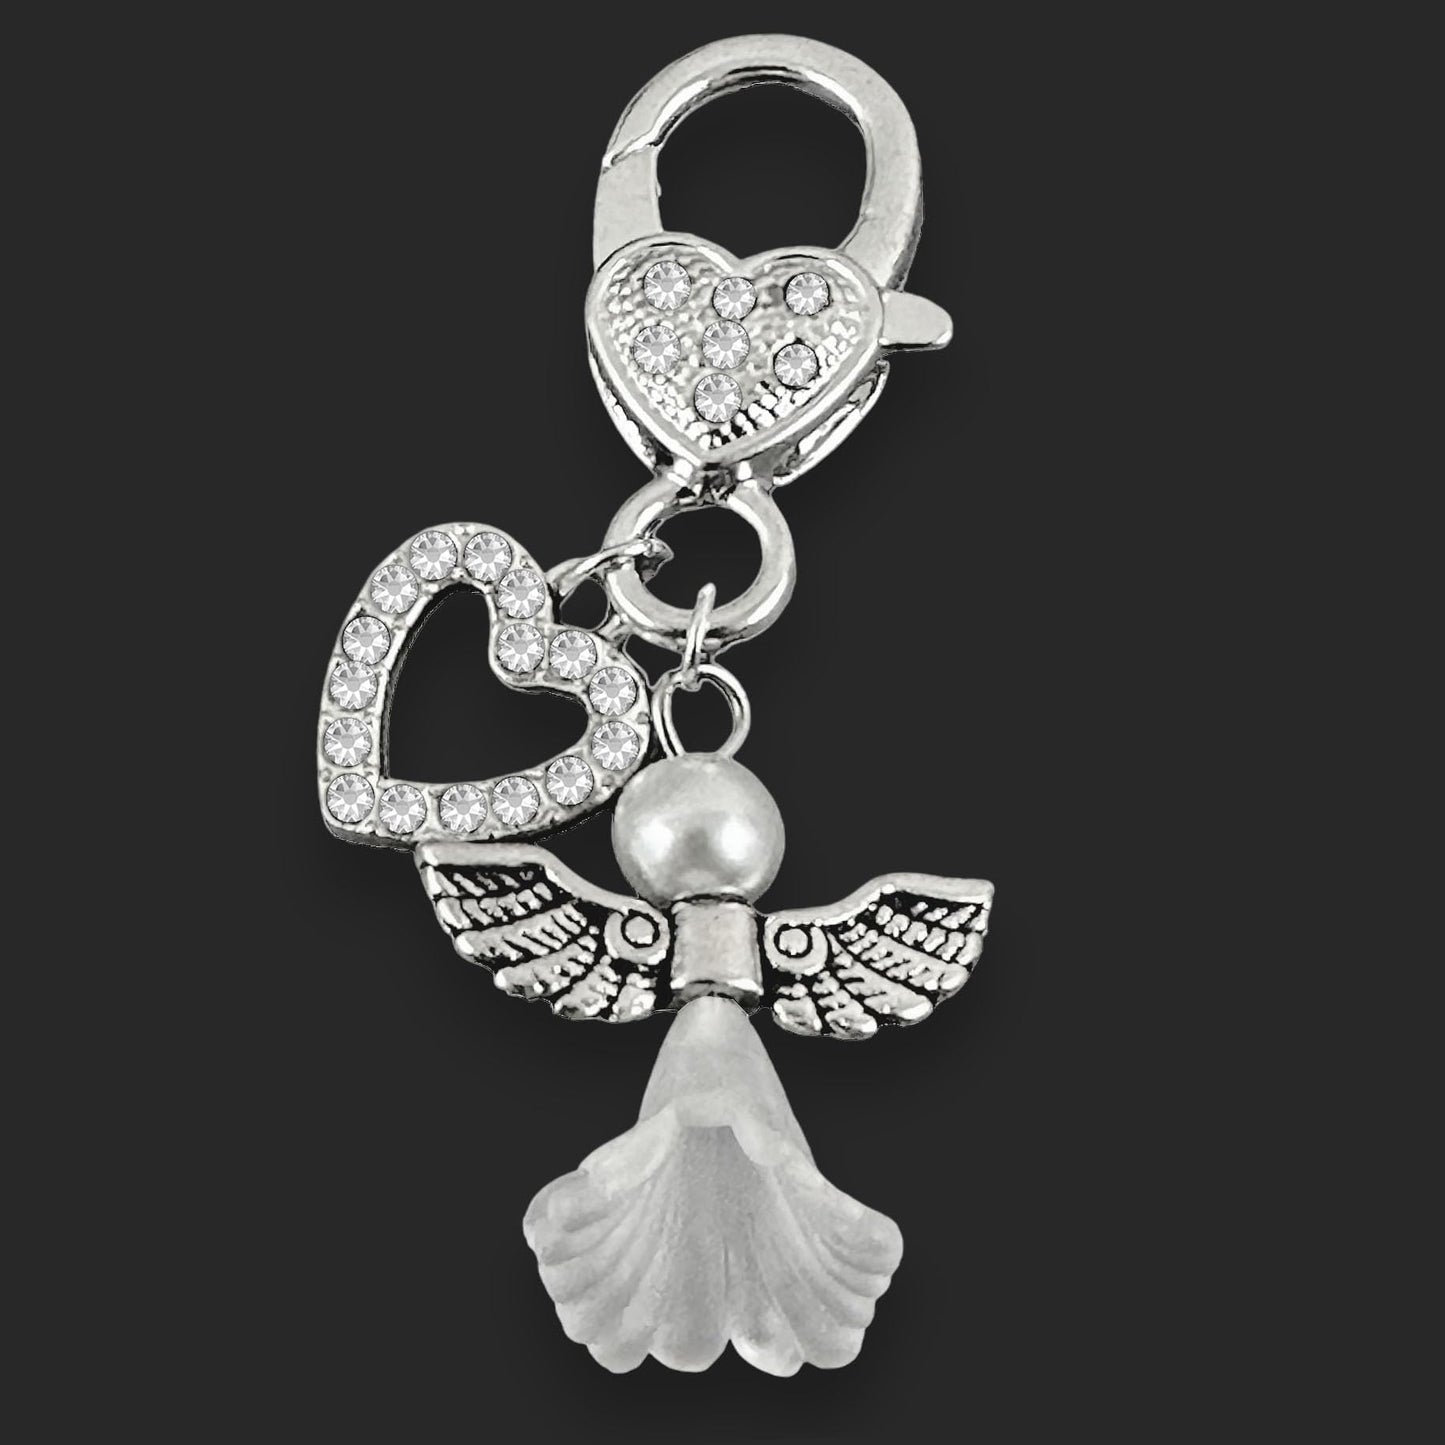 Angel for Bride's Bouquet Memorial Wedding Charm Memory Gift for Wedding Day Flowers